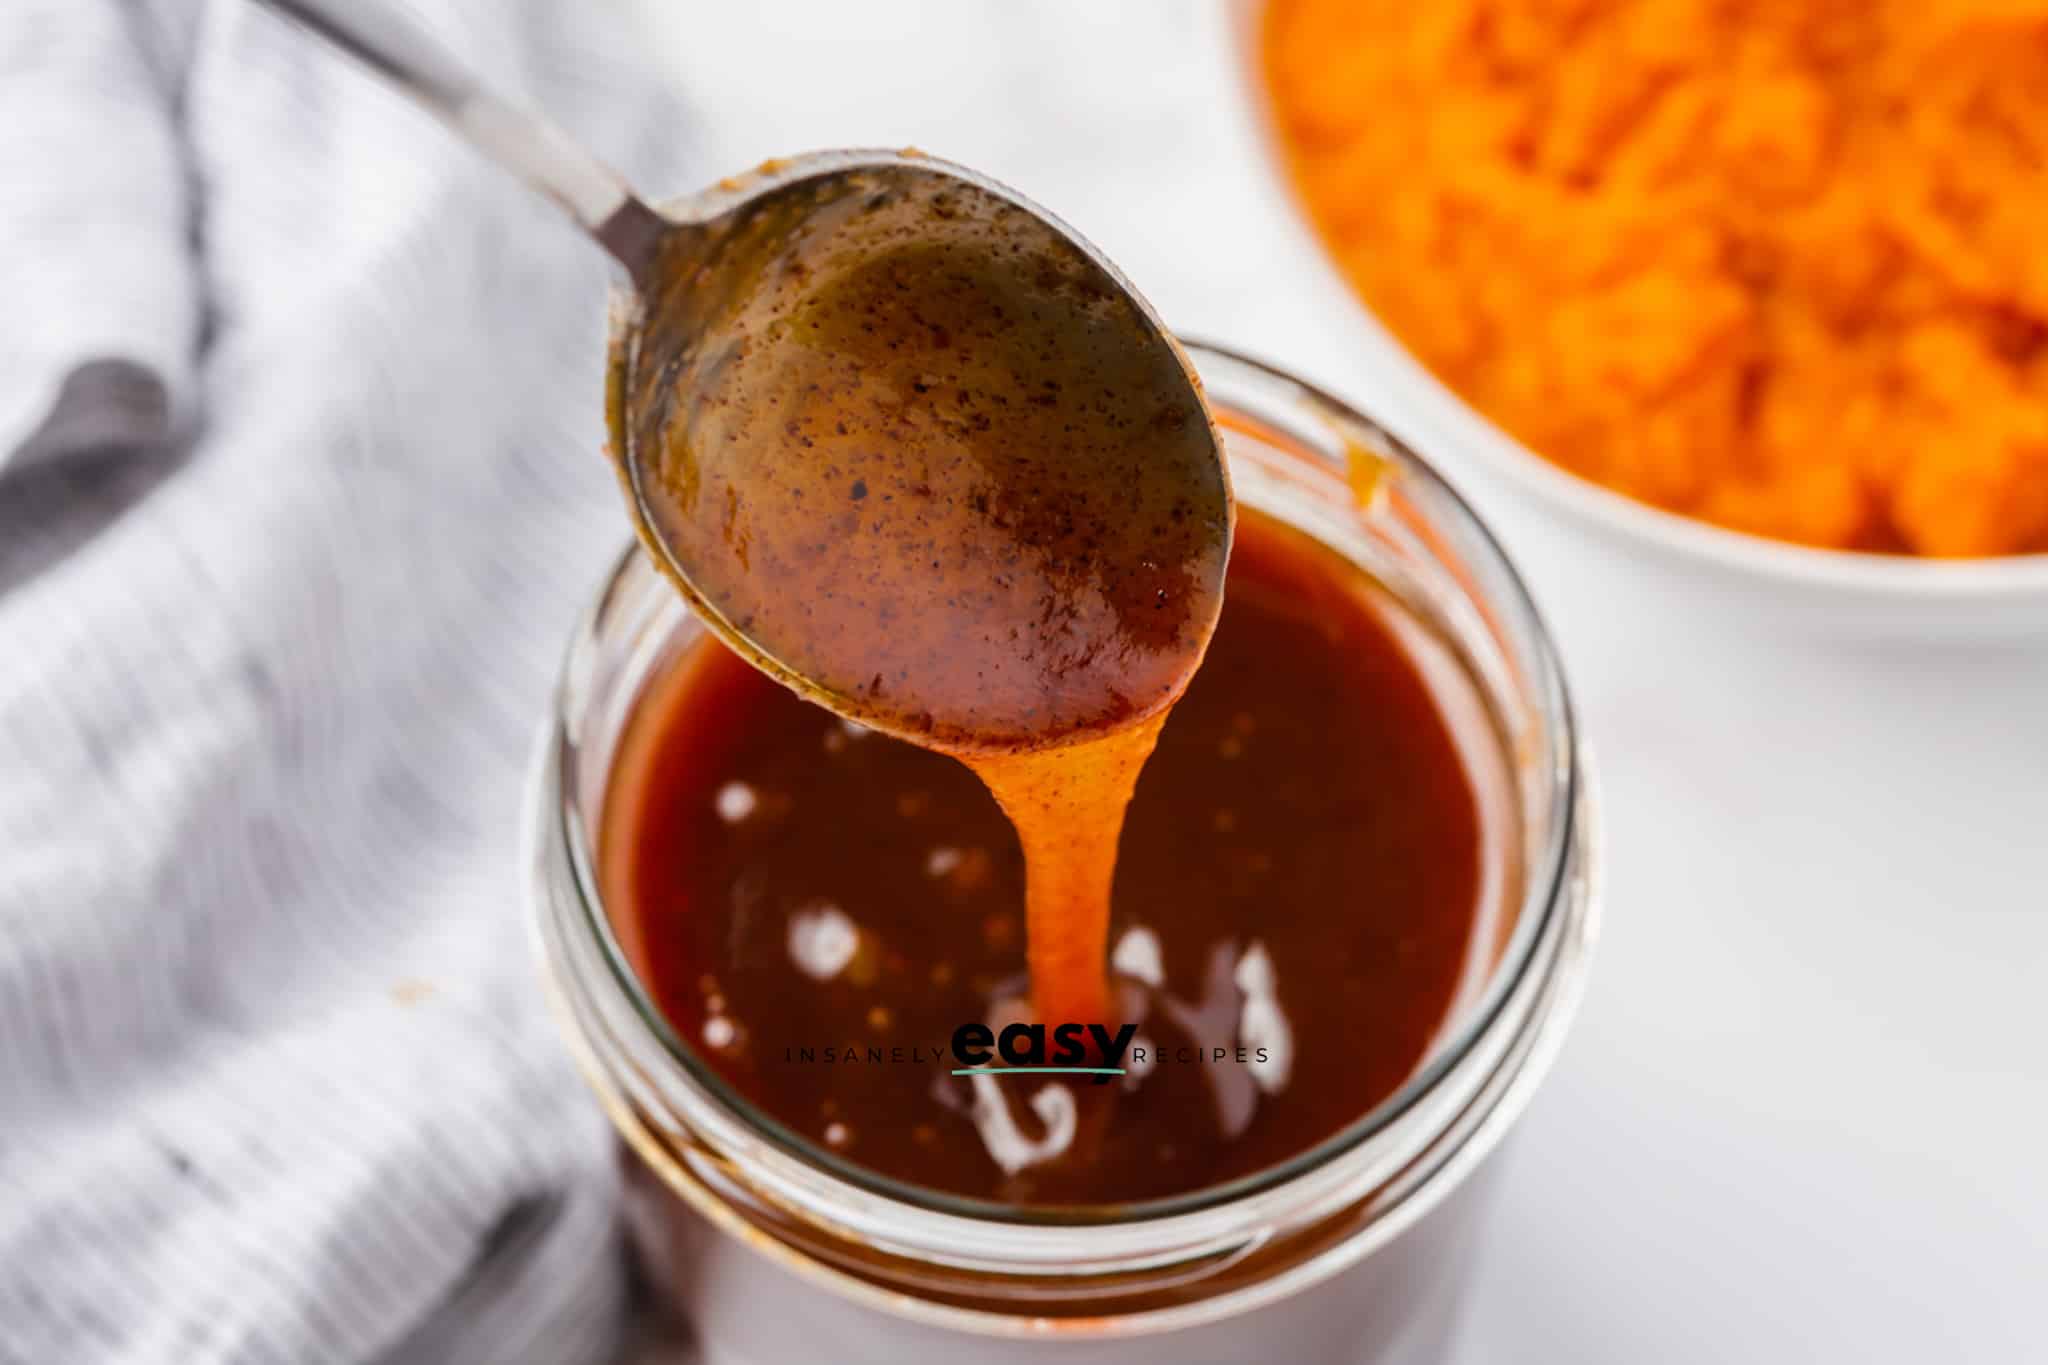 glass jar with brown liquid, metal spoon dipping into the liquid and some pouring off spoon. Top right corner has puree pumpkin in a white bowl. Gray napkin to left side.